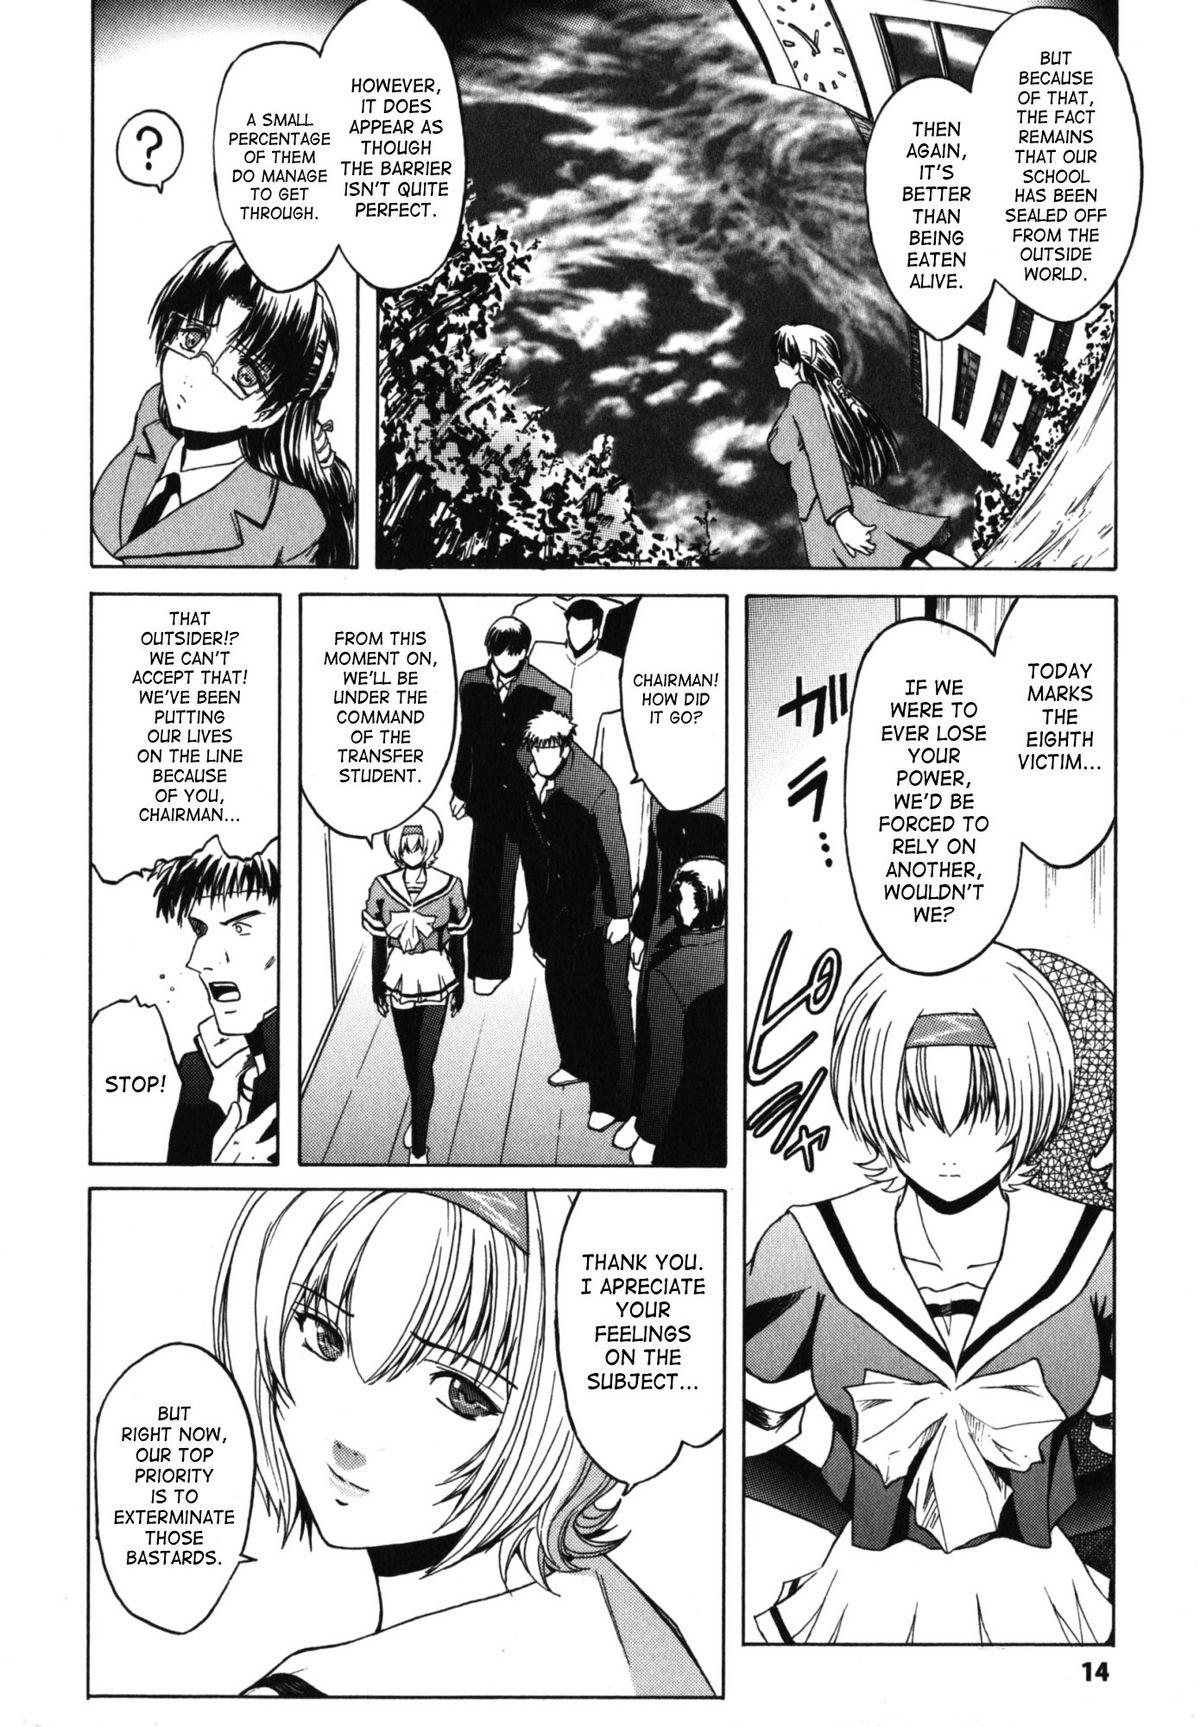 Kabe no Naka no Tenshi Jou | The Angel Within The Barrier Vol. 1 15